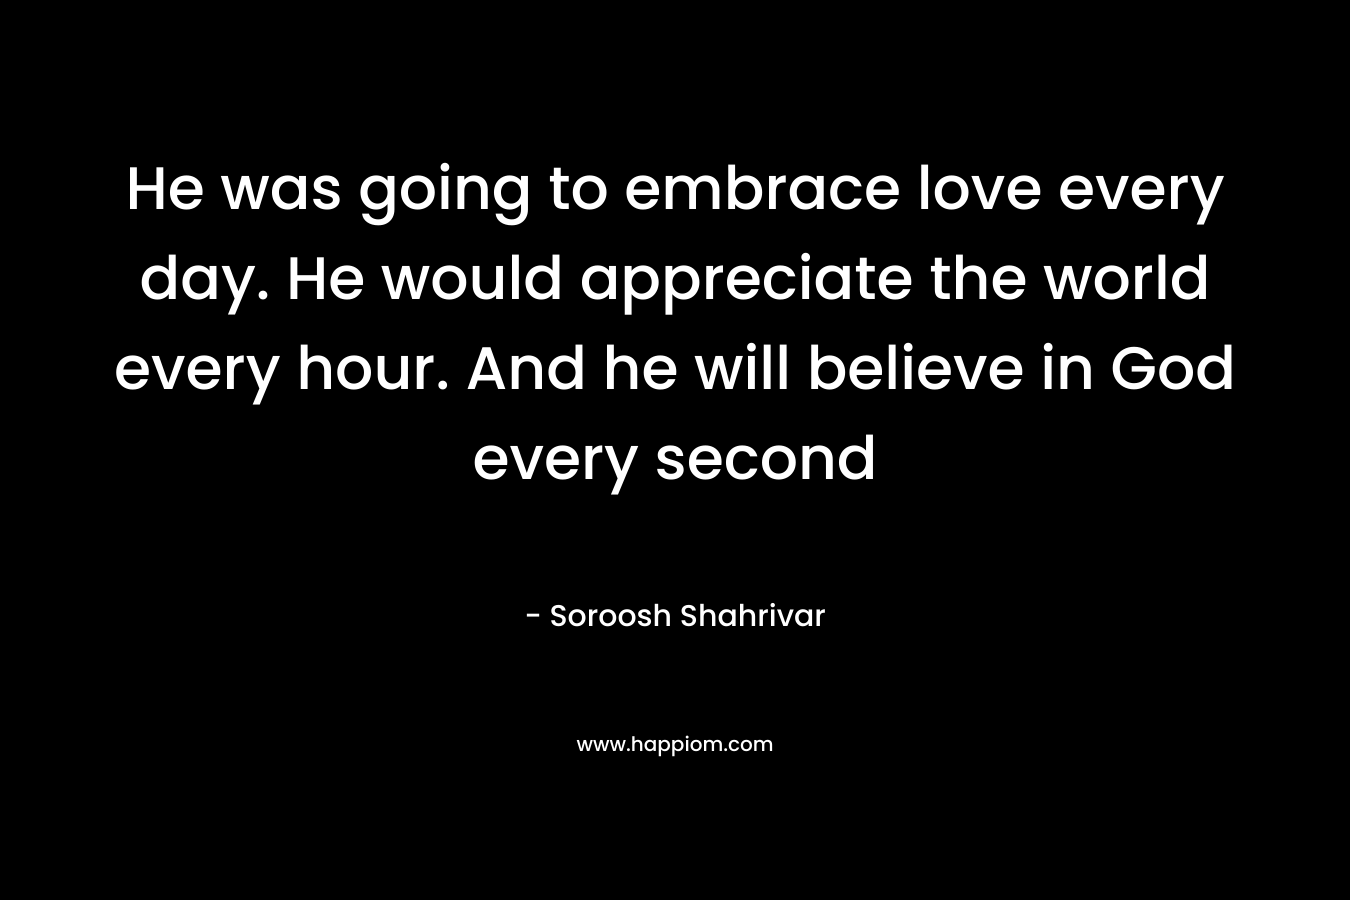 He was going to embrace love every day. He would appreciate the world every hour. And he will believe in God every second – Soroosh Shahrivar